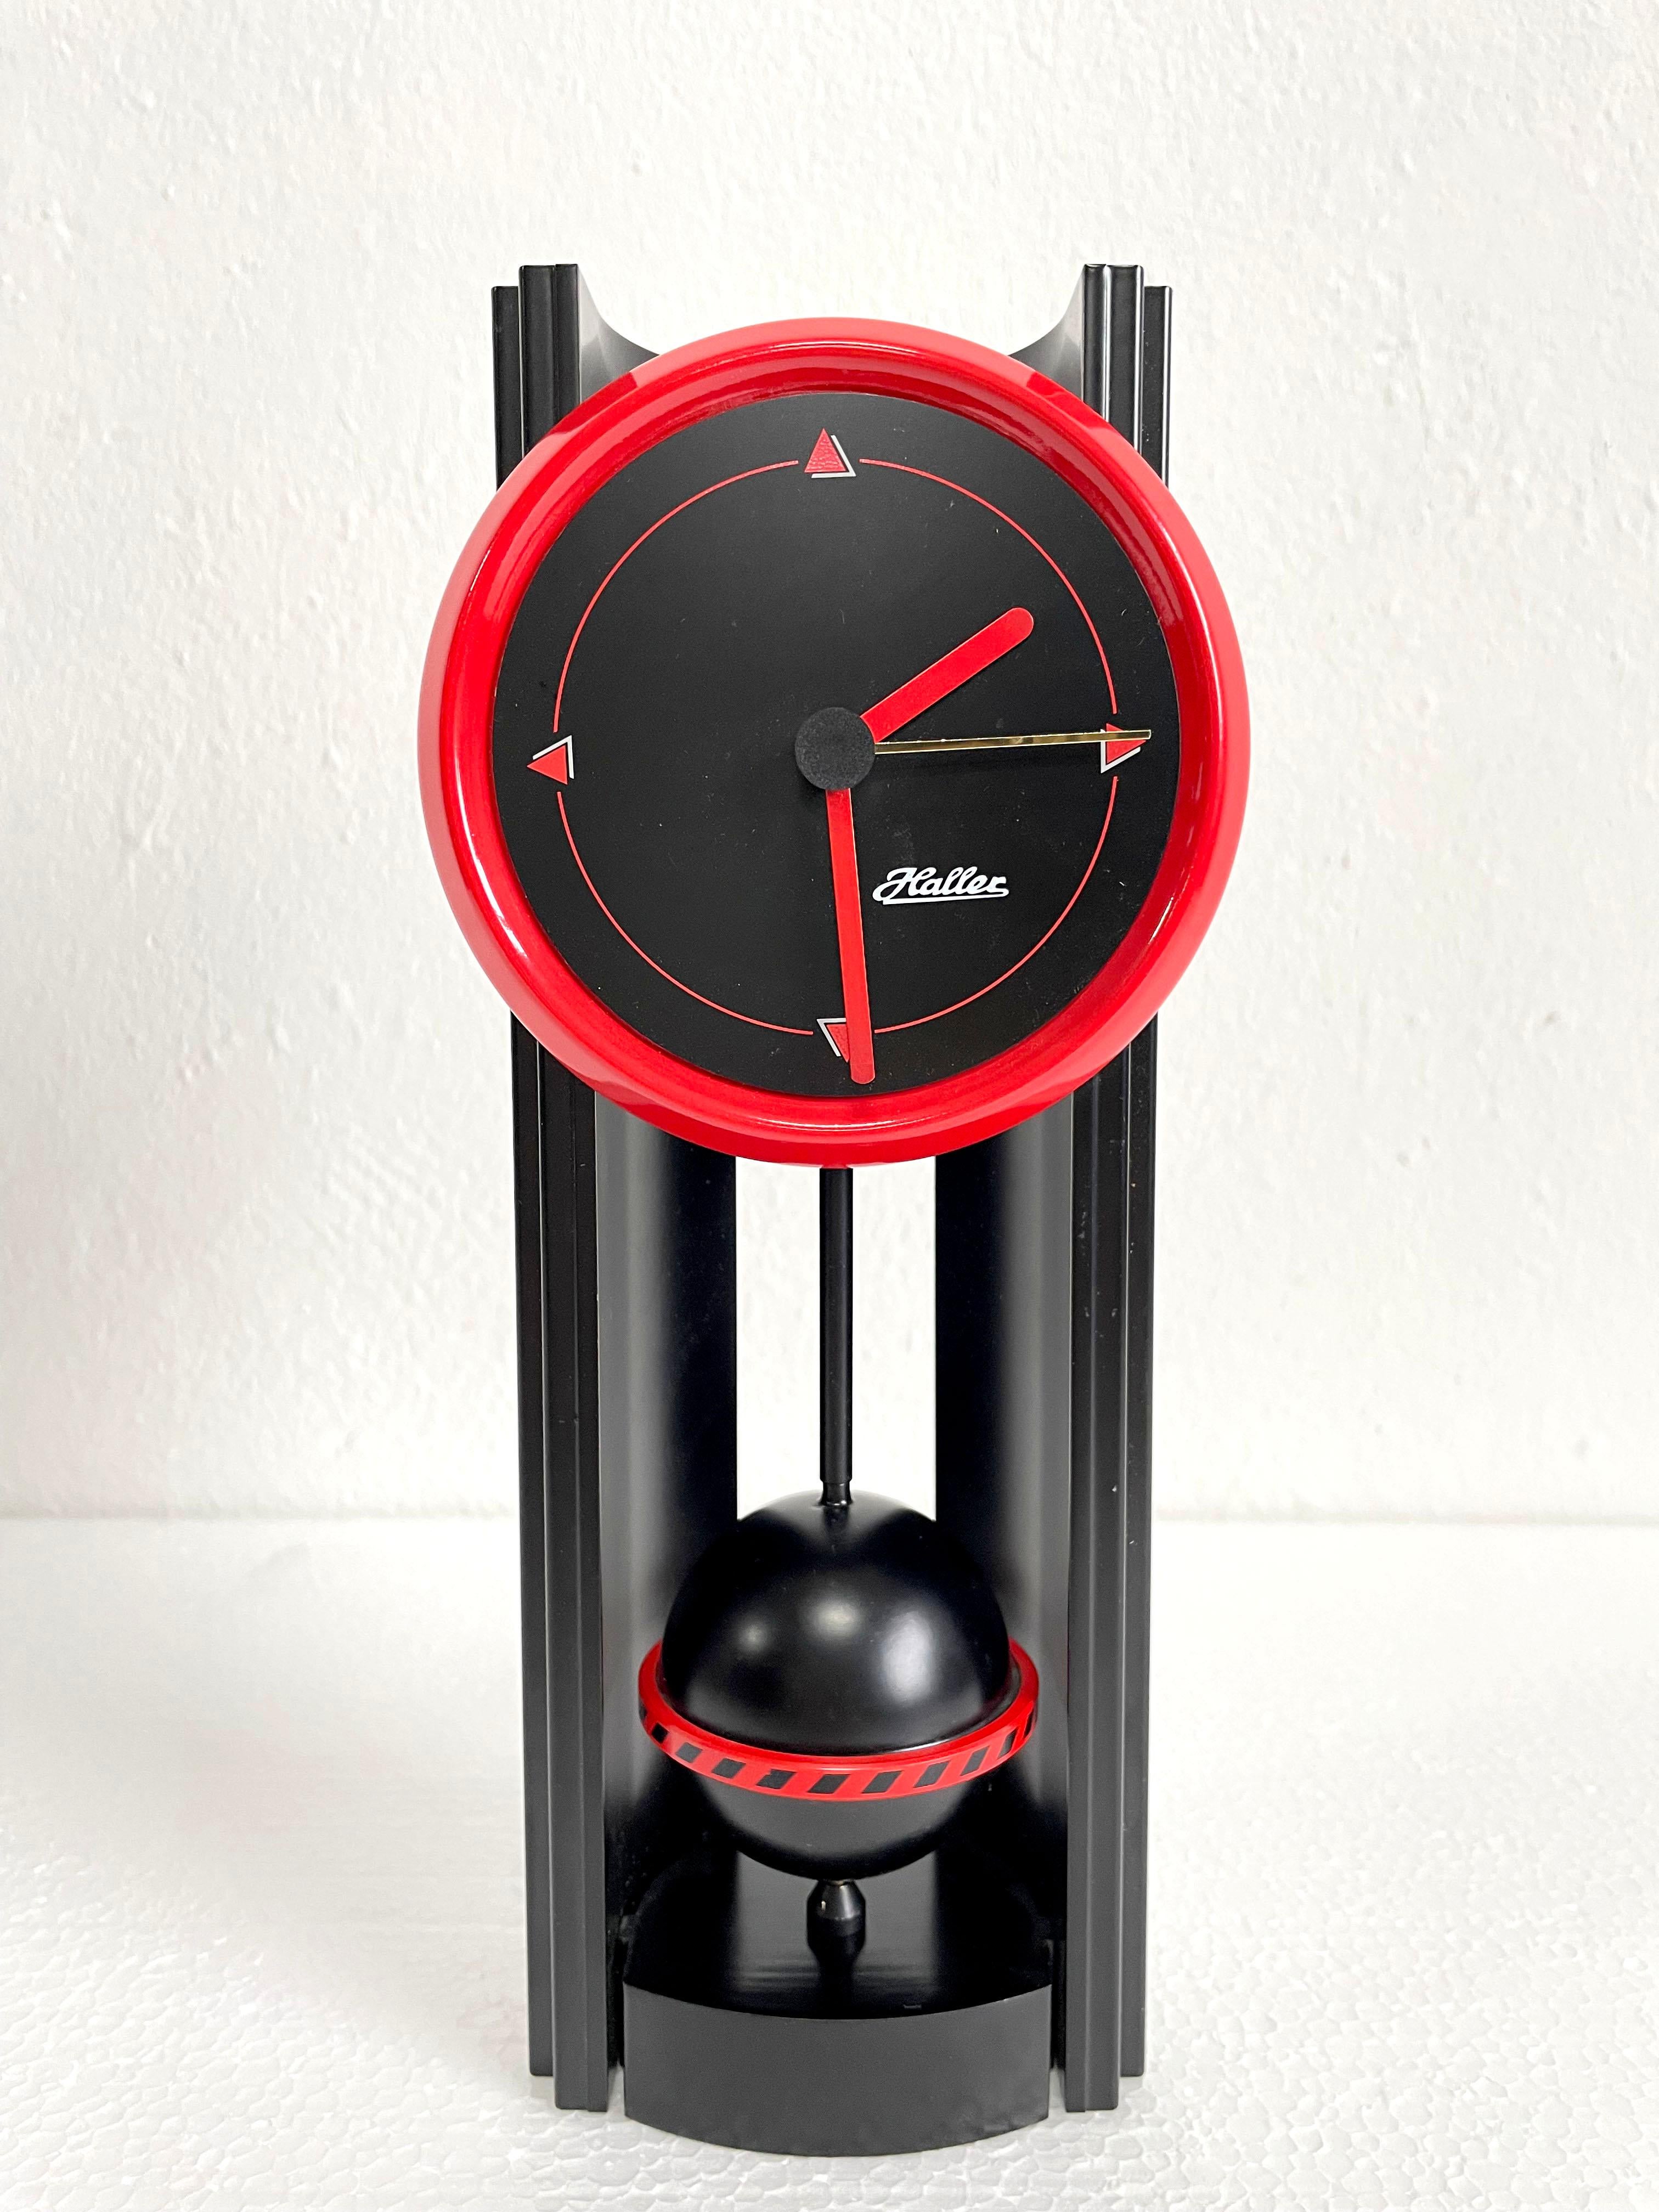 Rare Memphis style table clock produced in the 1980's in Germany by Haller Clocks.

The clock is made of black and red plastic and has a battery operated mechanism for one AA type battery. It's in a pristine condition, without any wear and tear